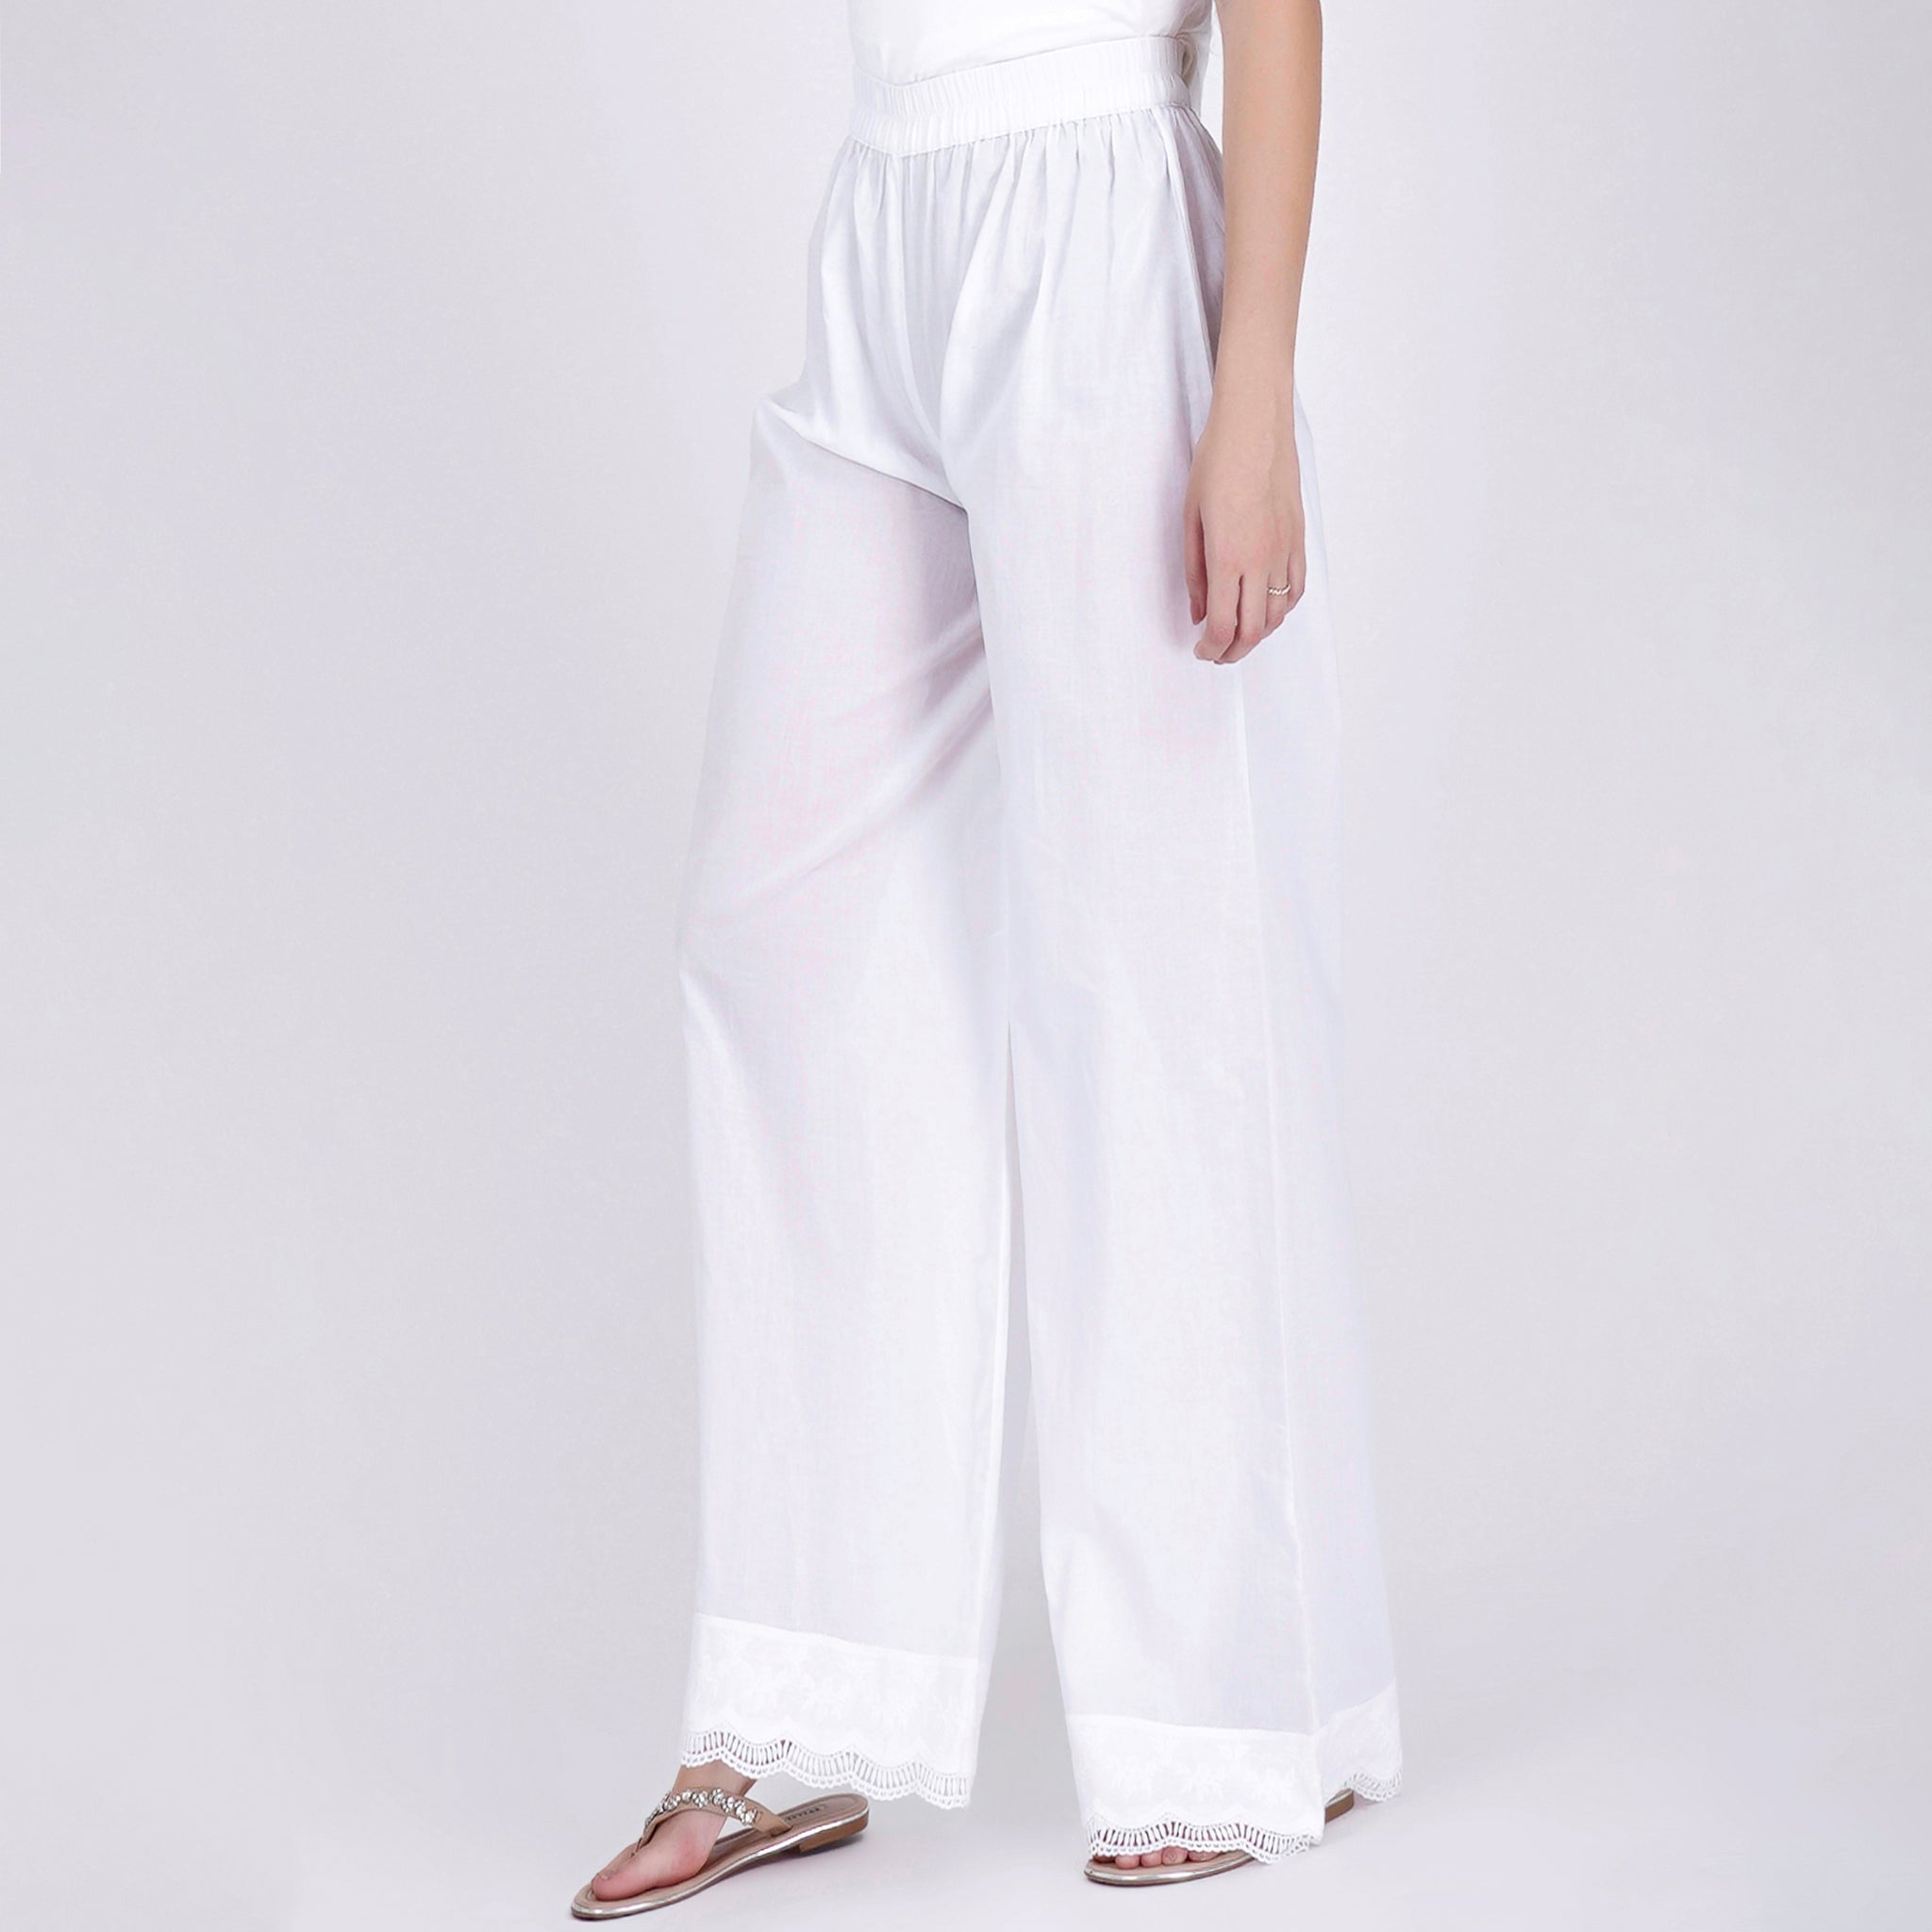 Flattering White Pants For Summer Styled Two Effortless Ways